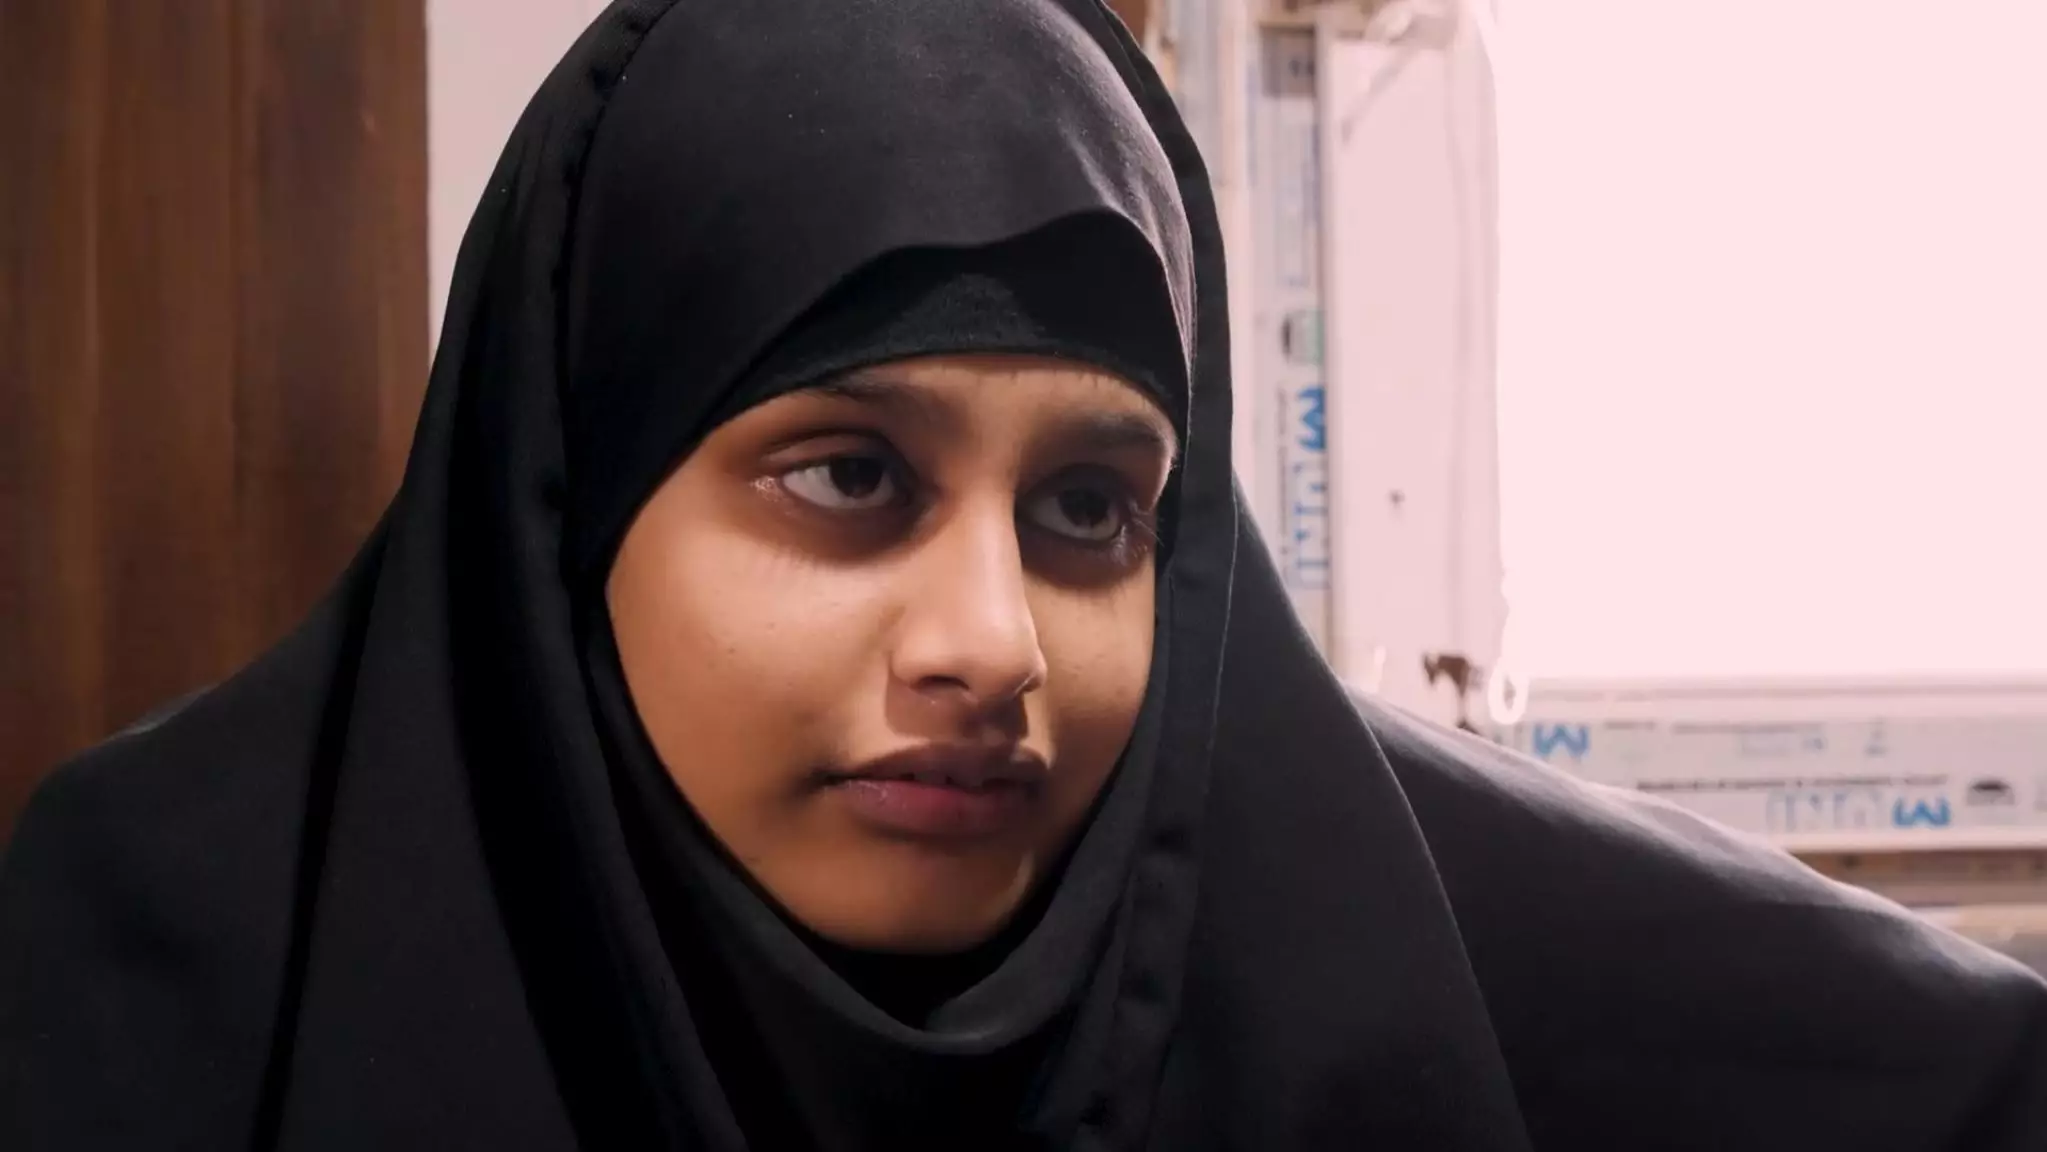 Shamima Begum Told There Is 'No Way' She's Returning To Britain